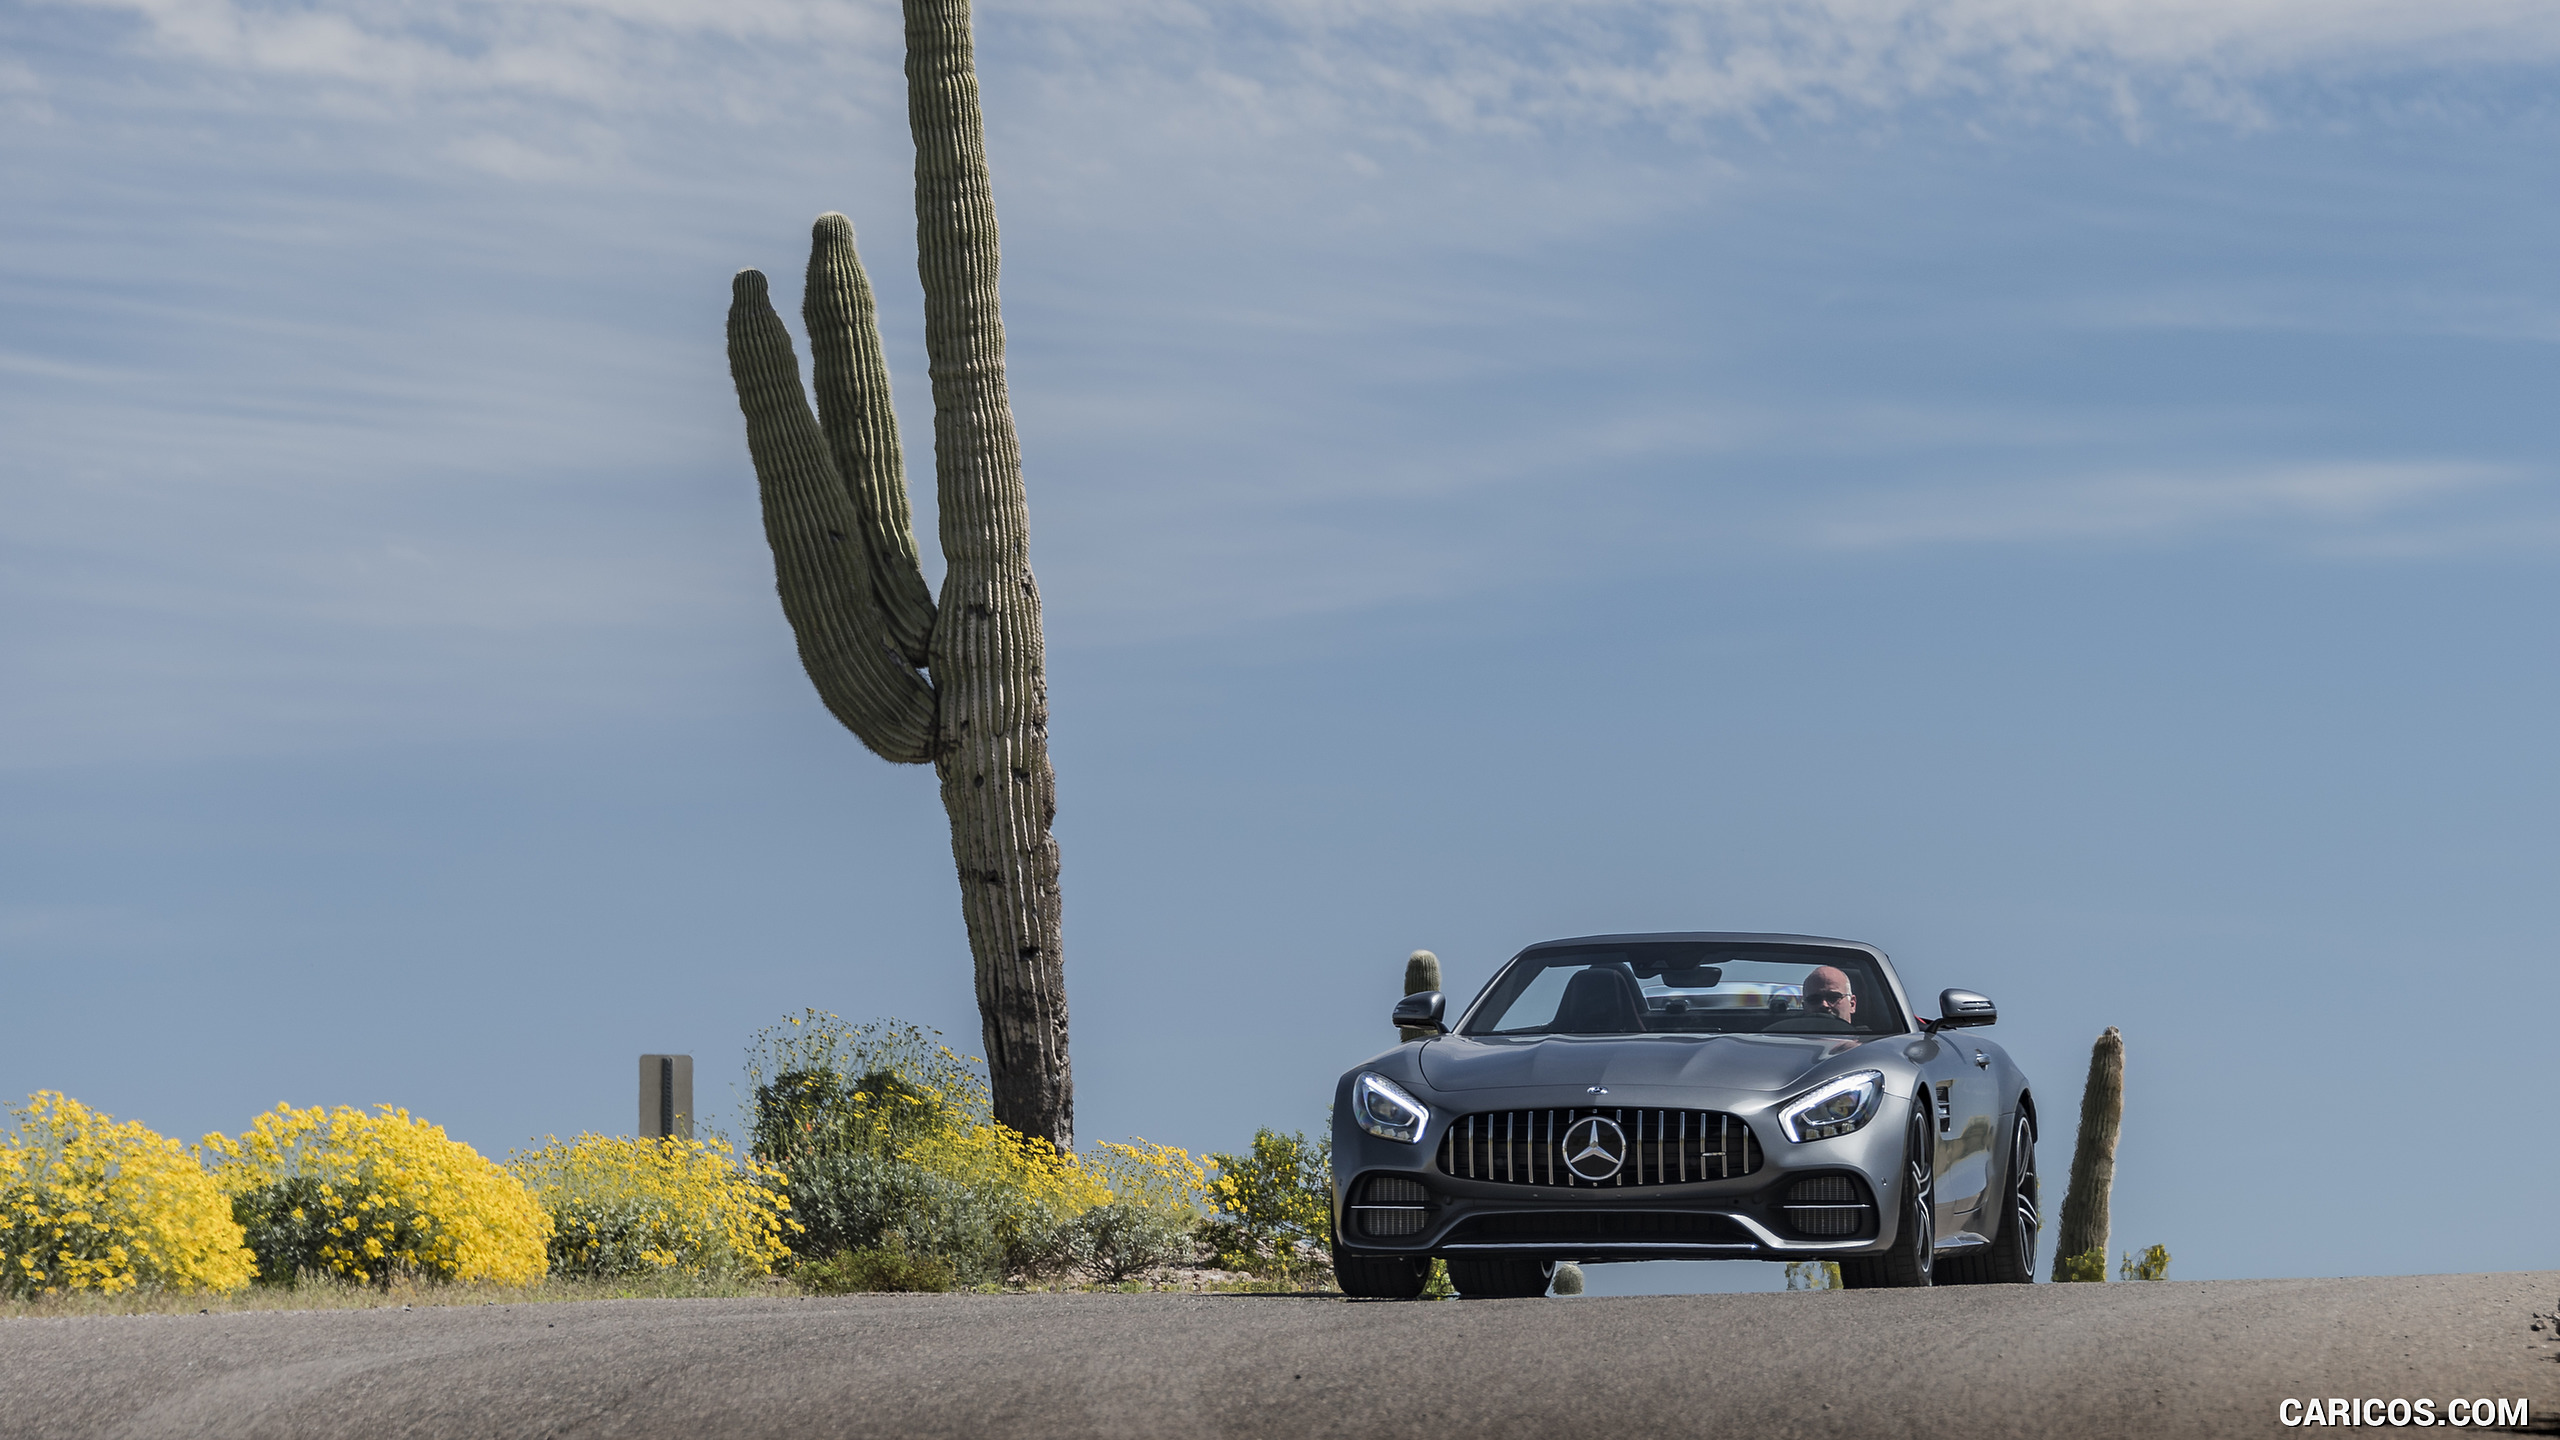 2018 Mercedes-AMG GT C Roadster - Front, #321 of 350